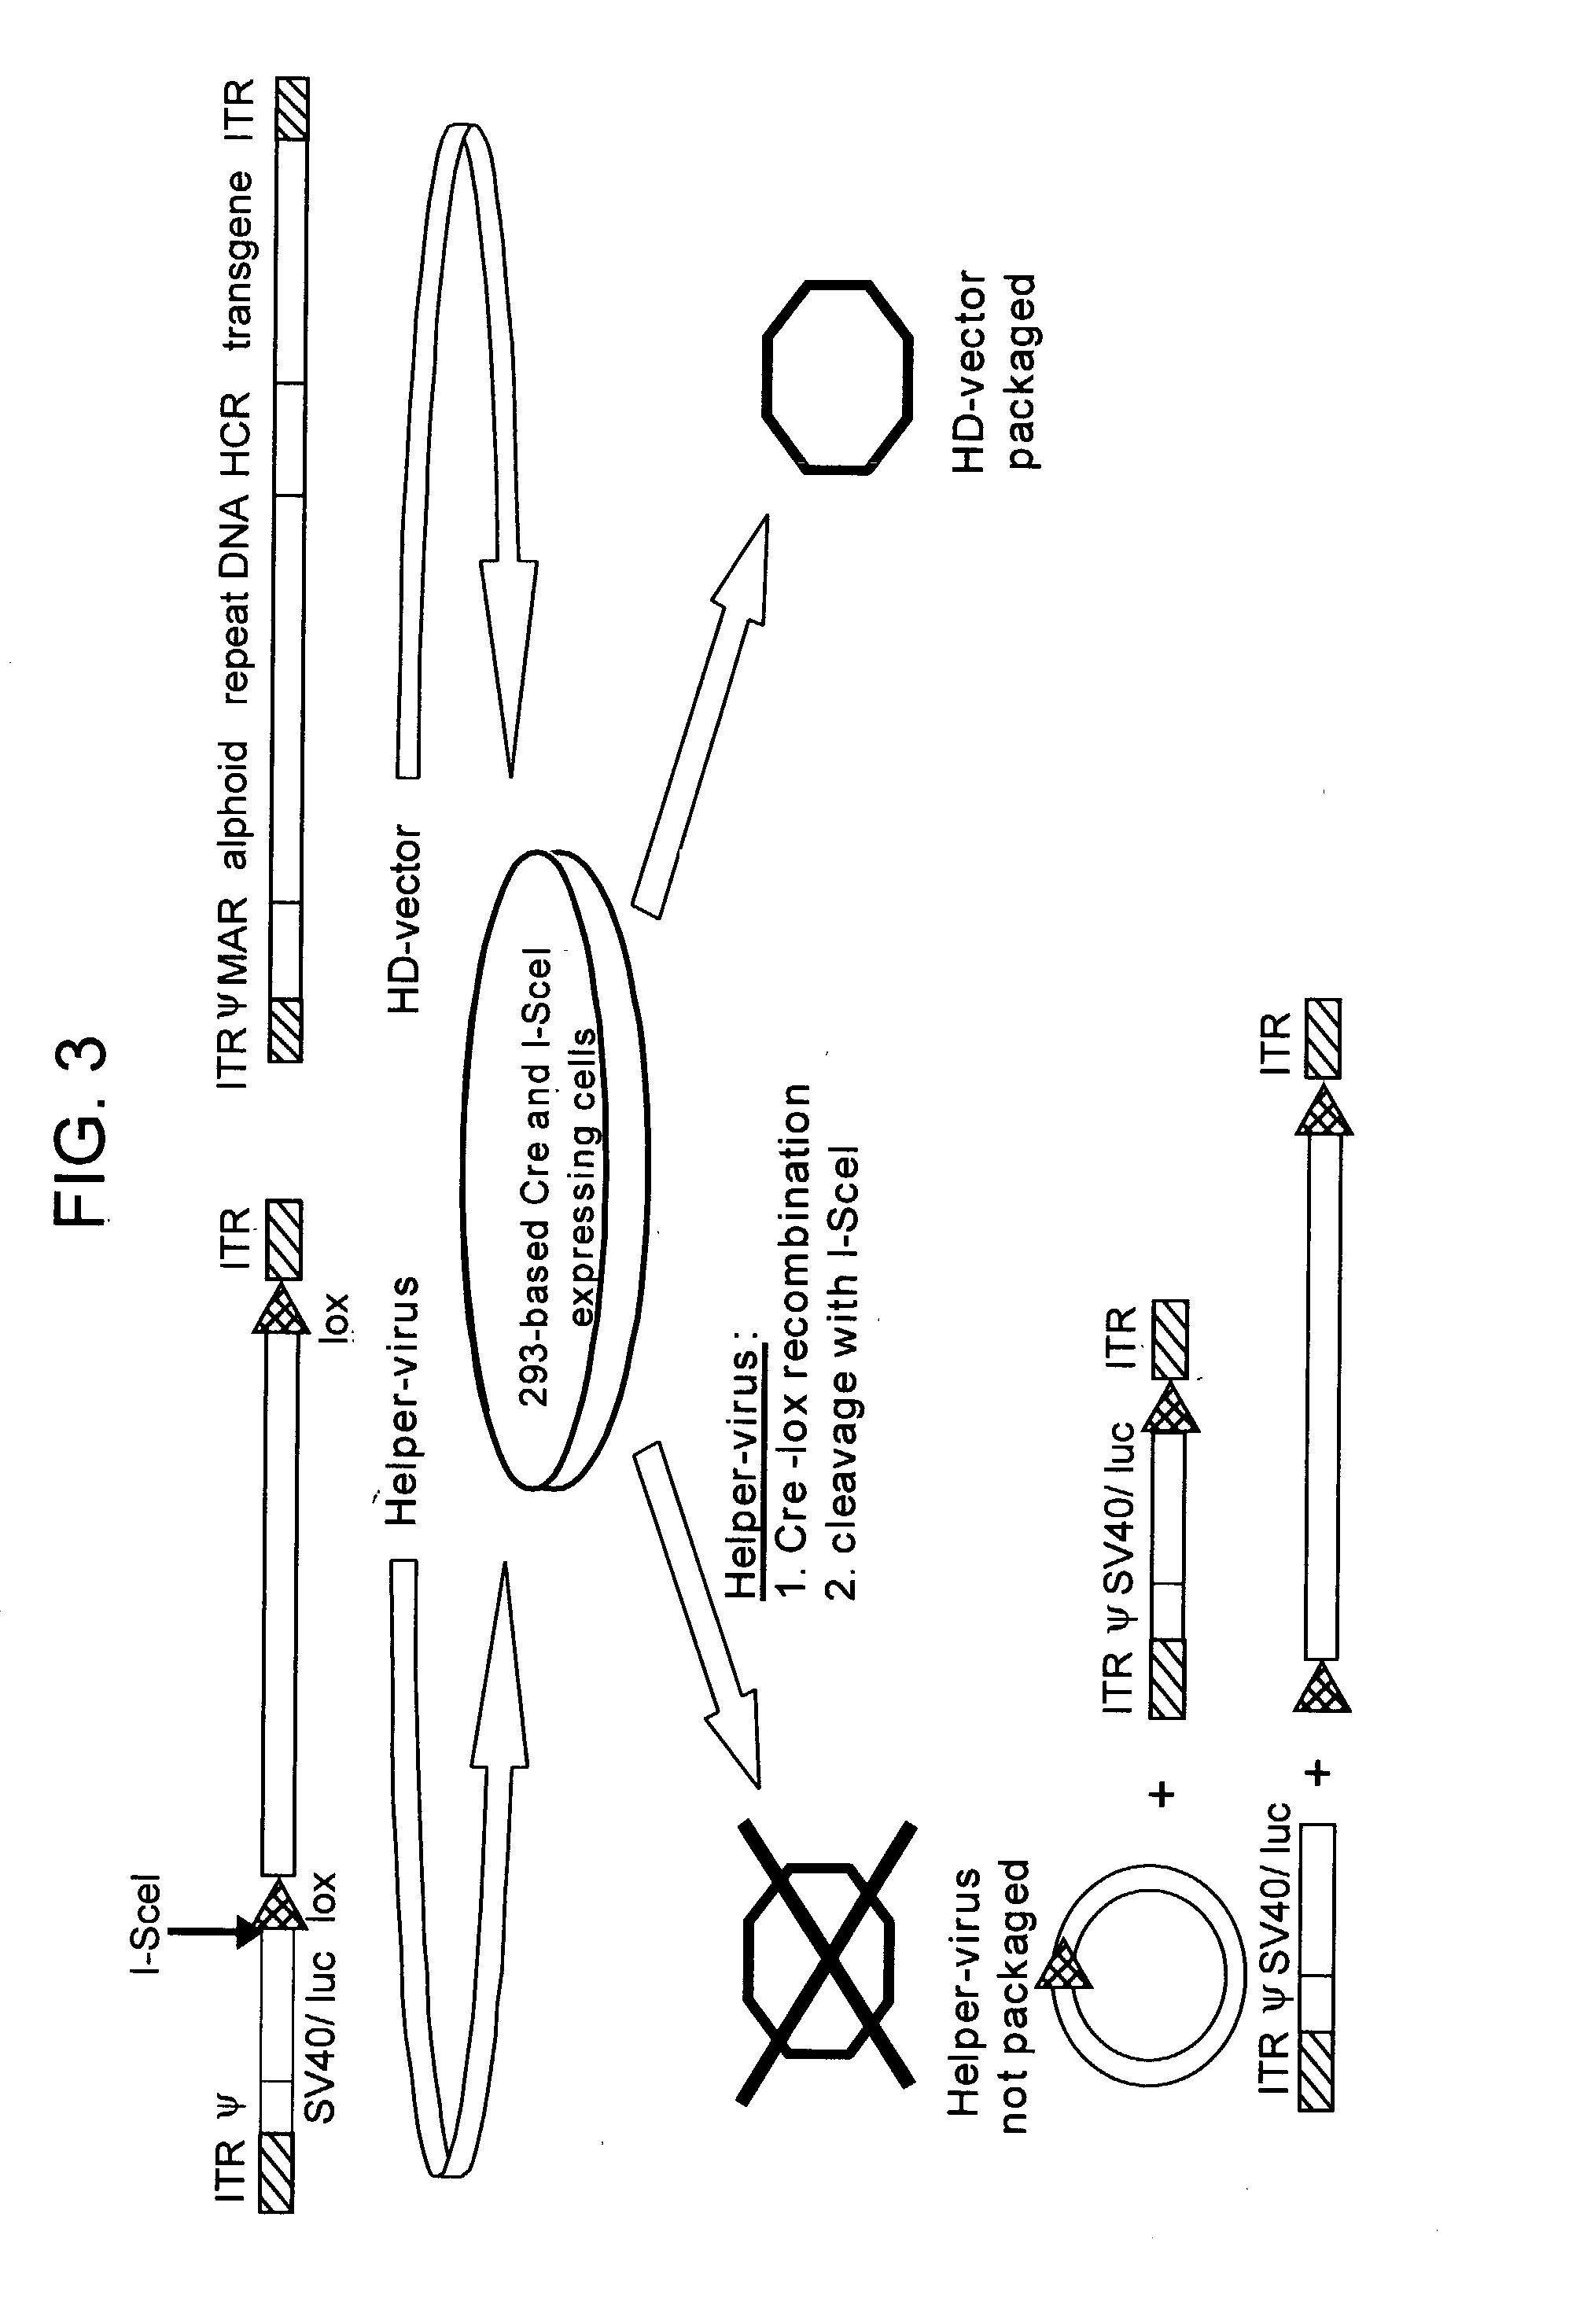 Helper dependent adenoviral vector system and methods for using the same